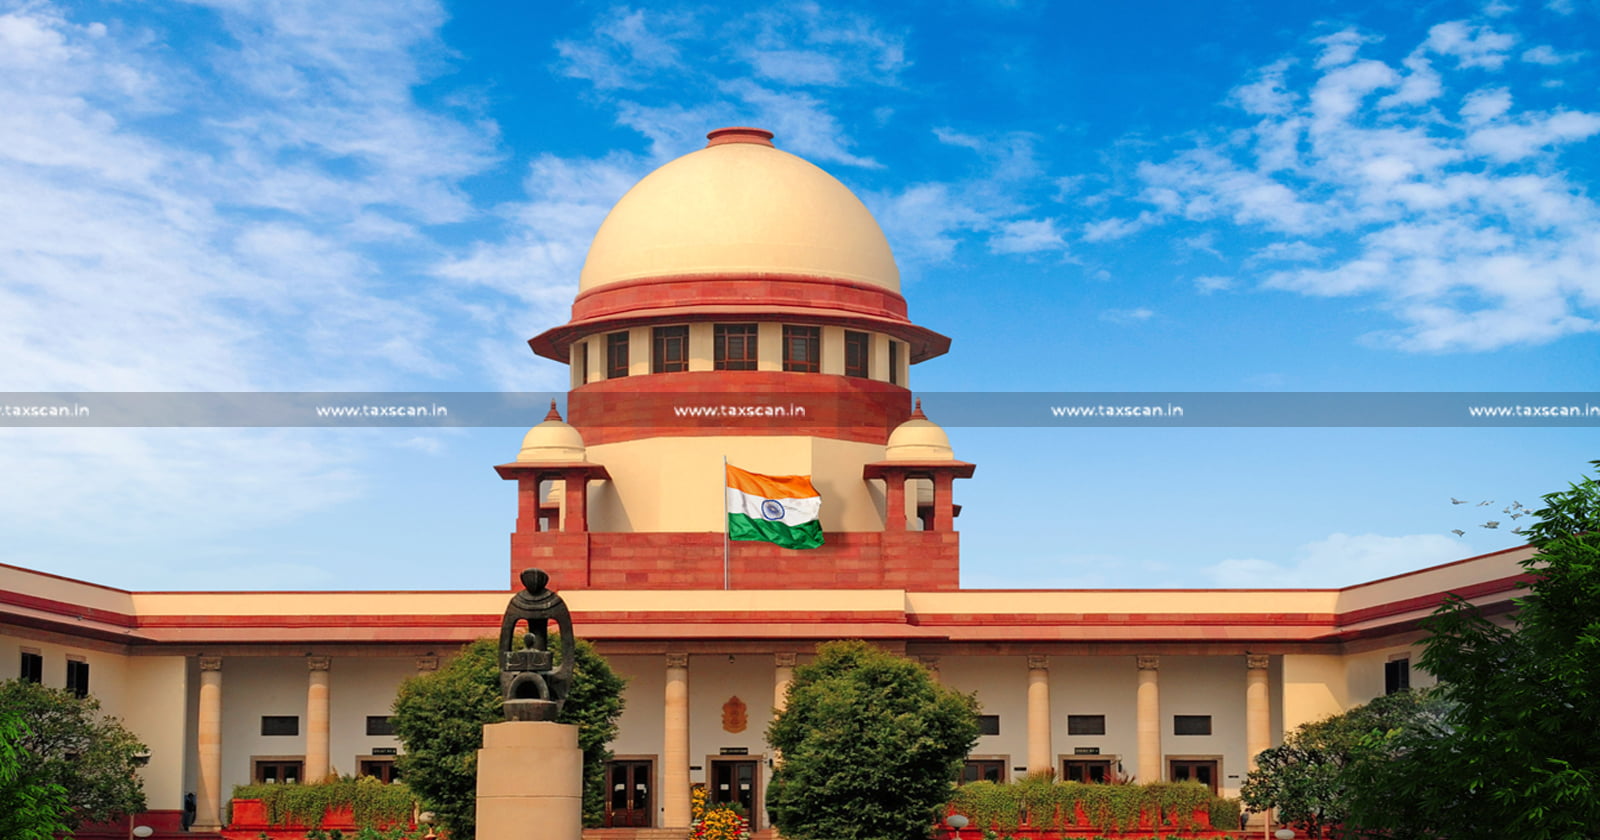 Compounding of Offence - Customs Act - CESTAT - SC - Re-consideration - taxscan